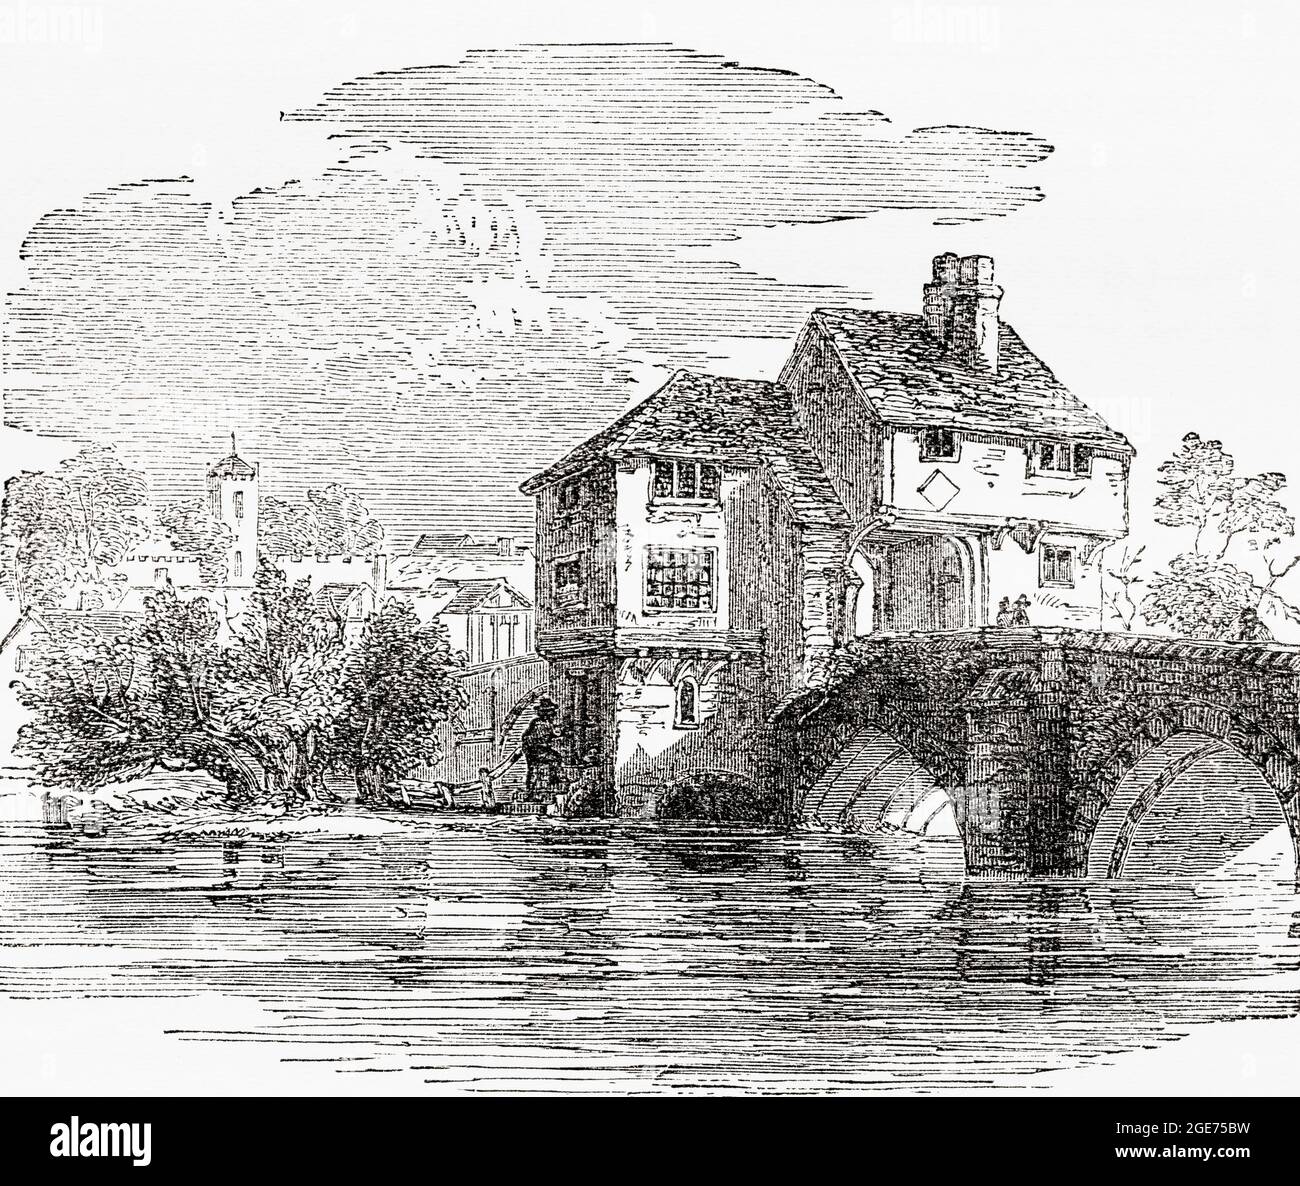 Old Bedford Jail, built on the Town Bridge across the River Ouse, Bedford, England, seen here in the 19th century. John Bunyan, the Baptist preacher and author of The Pilgrim's Progress, was imprisoned here when preaching was prohibited by King Charles II, who ordered that all preachers who did not belong to the Church of England (Episcopal) should be imprisoned or banished. From Picturesque England, Its Landmarks and Historic Haunts, published 1891. Stock Photo